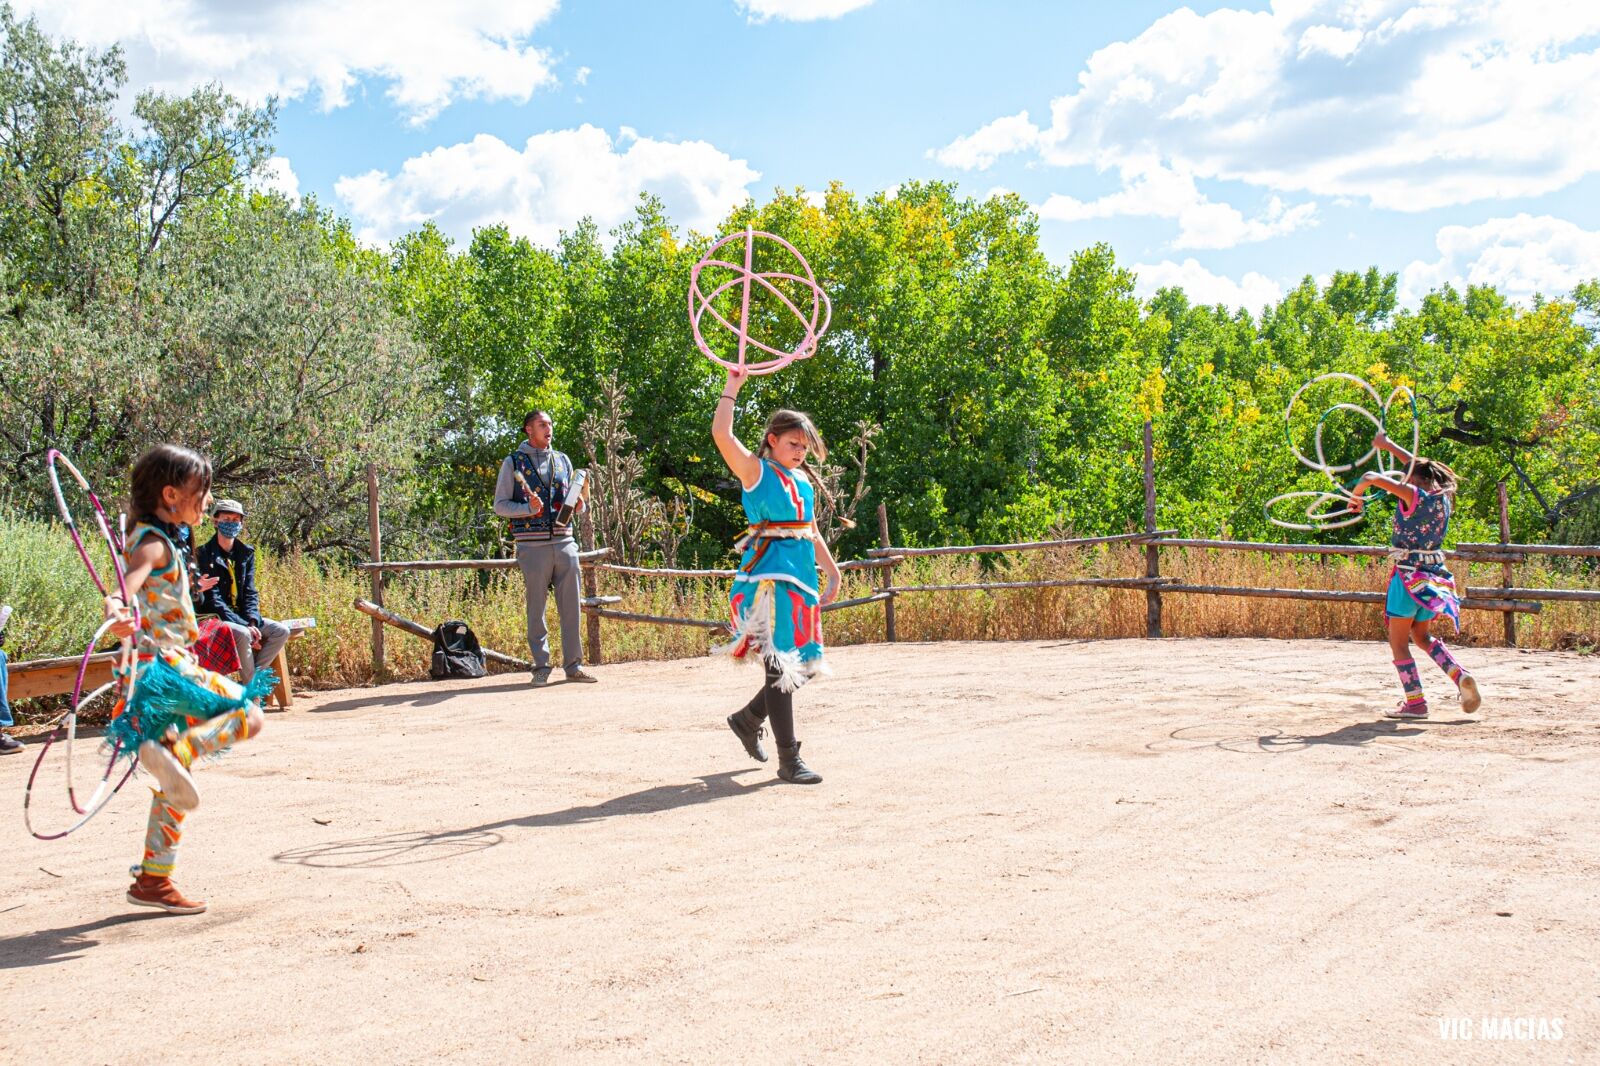 El Rancho De Las Golondrinas museum one of the best things to do in Santa fe with kids